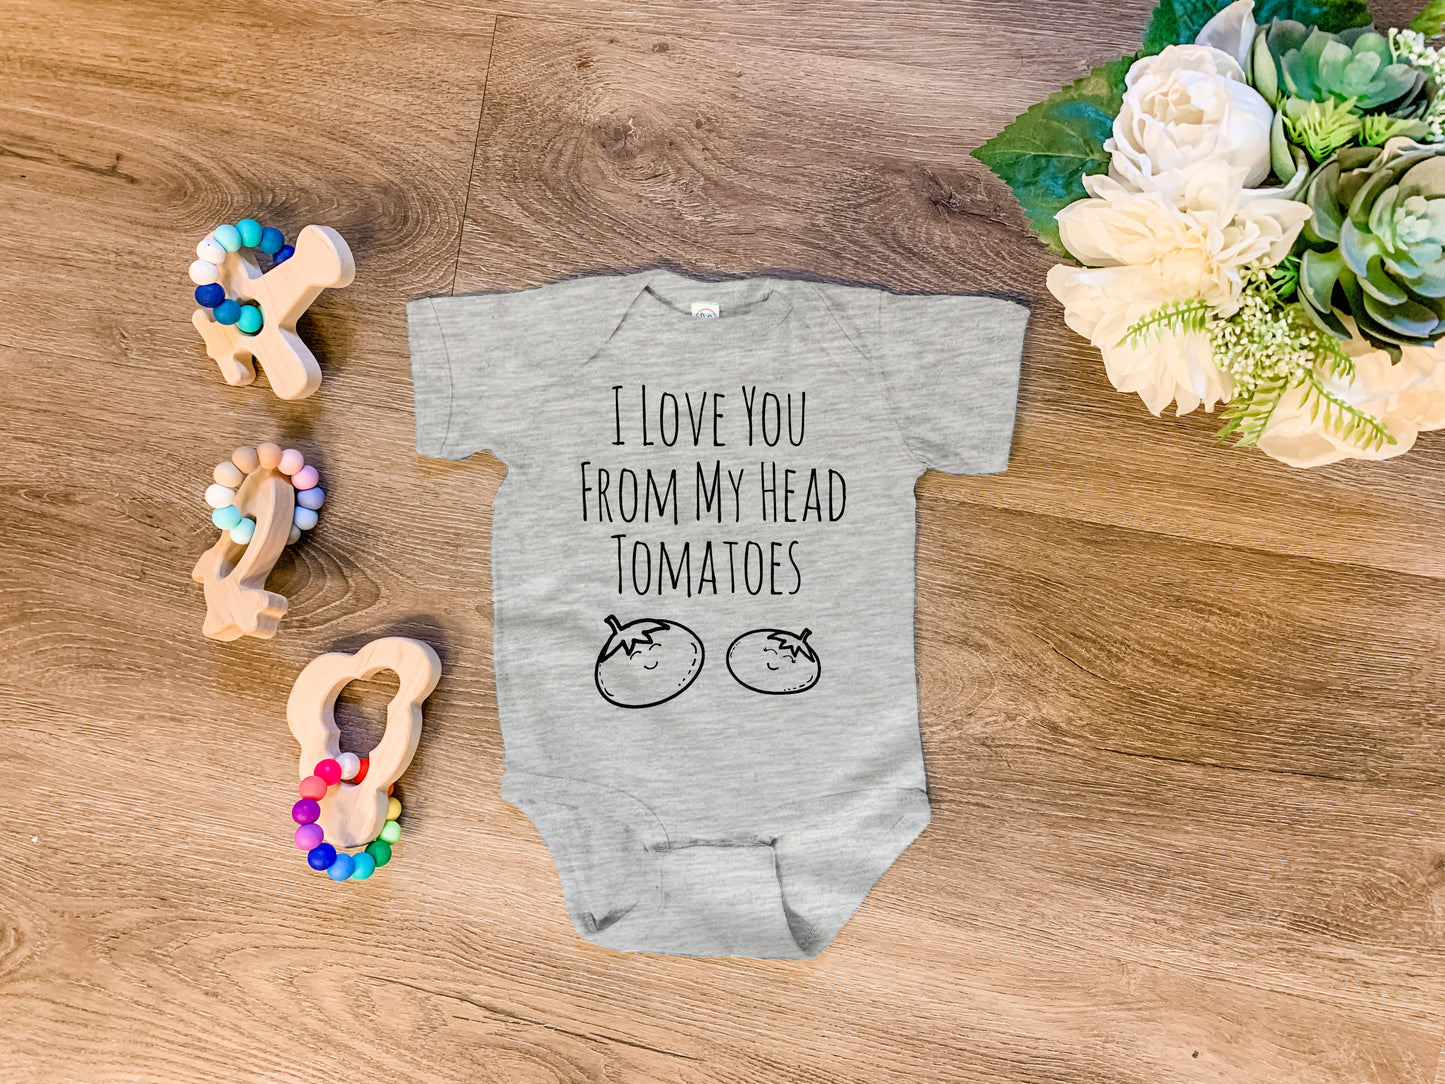 I Love You From My Head Tomatoes - Onesie - Heather Gray, Chill, or Lavender